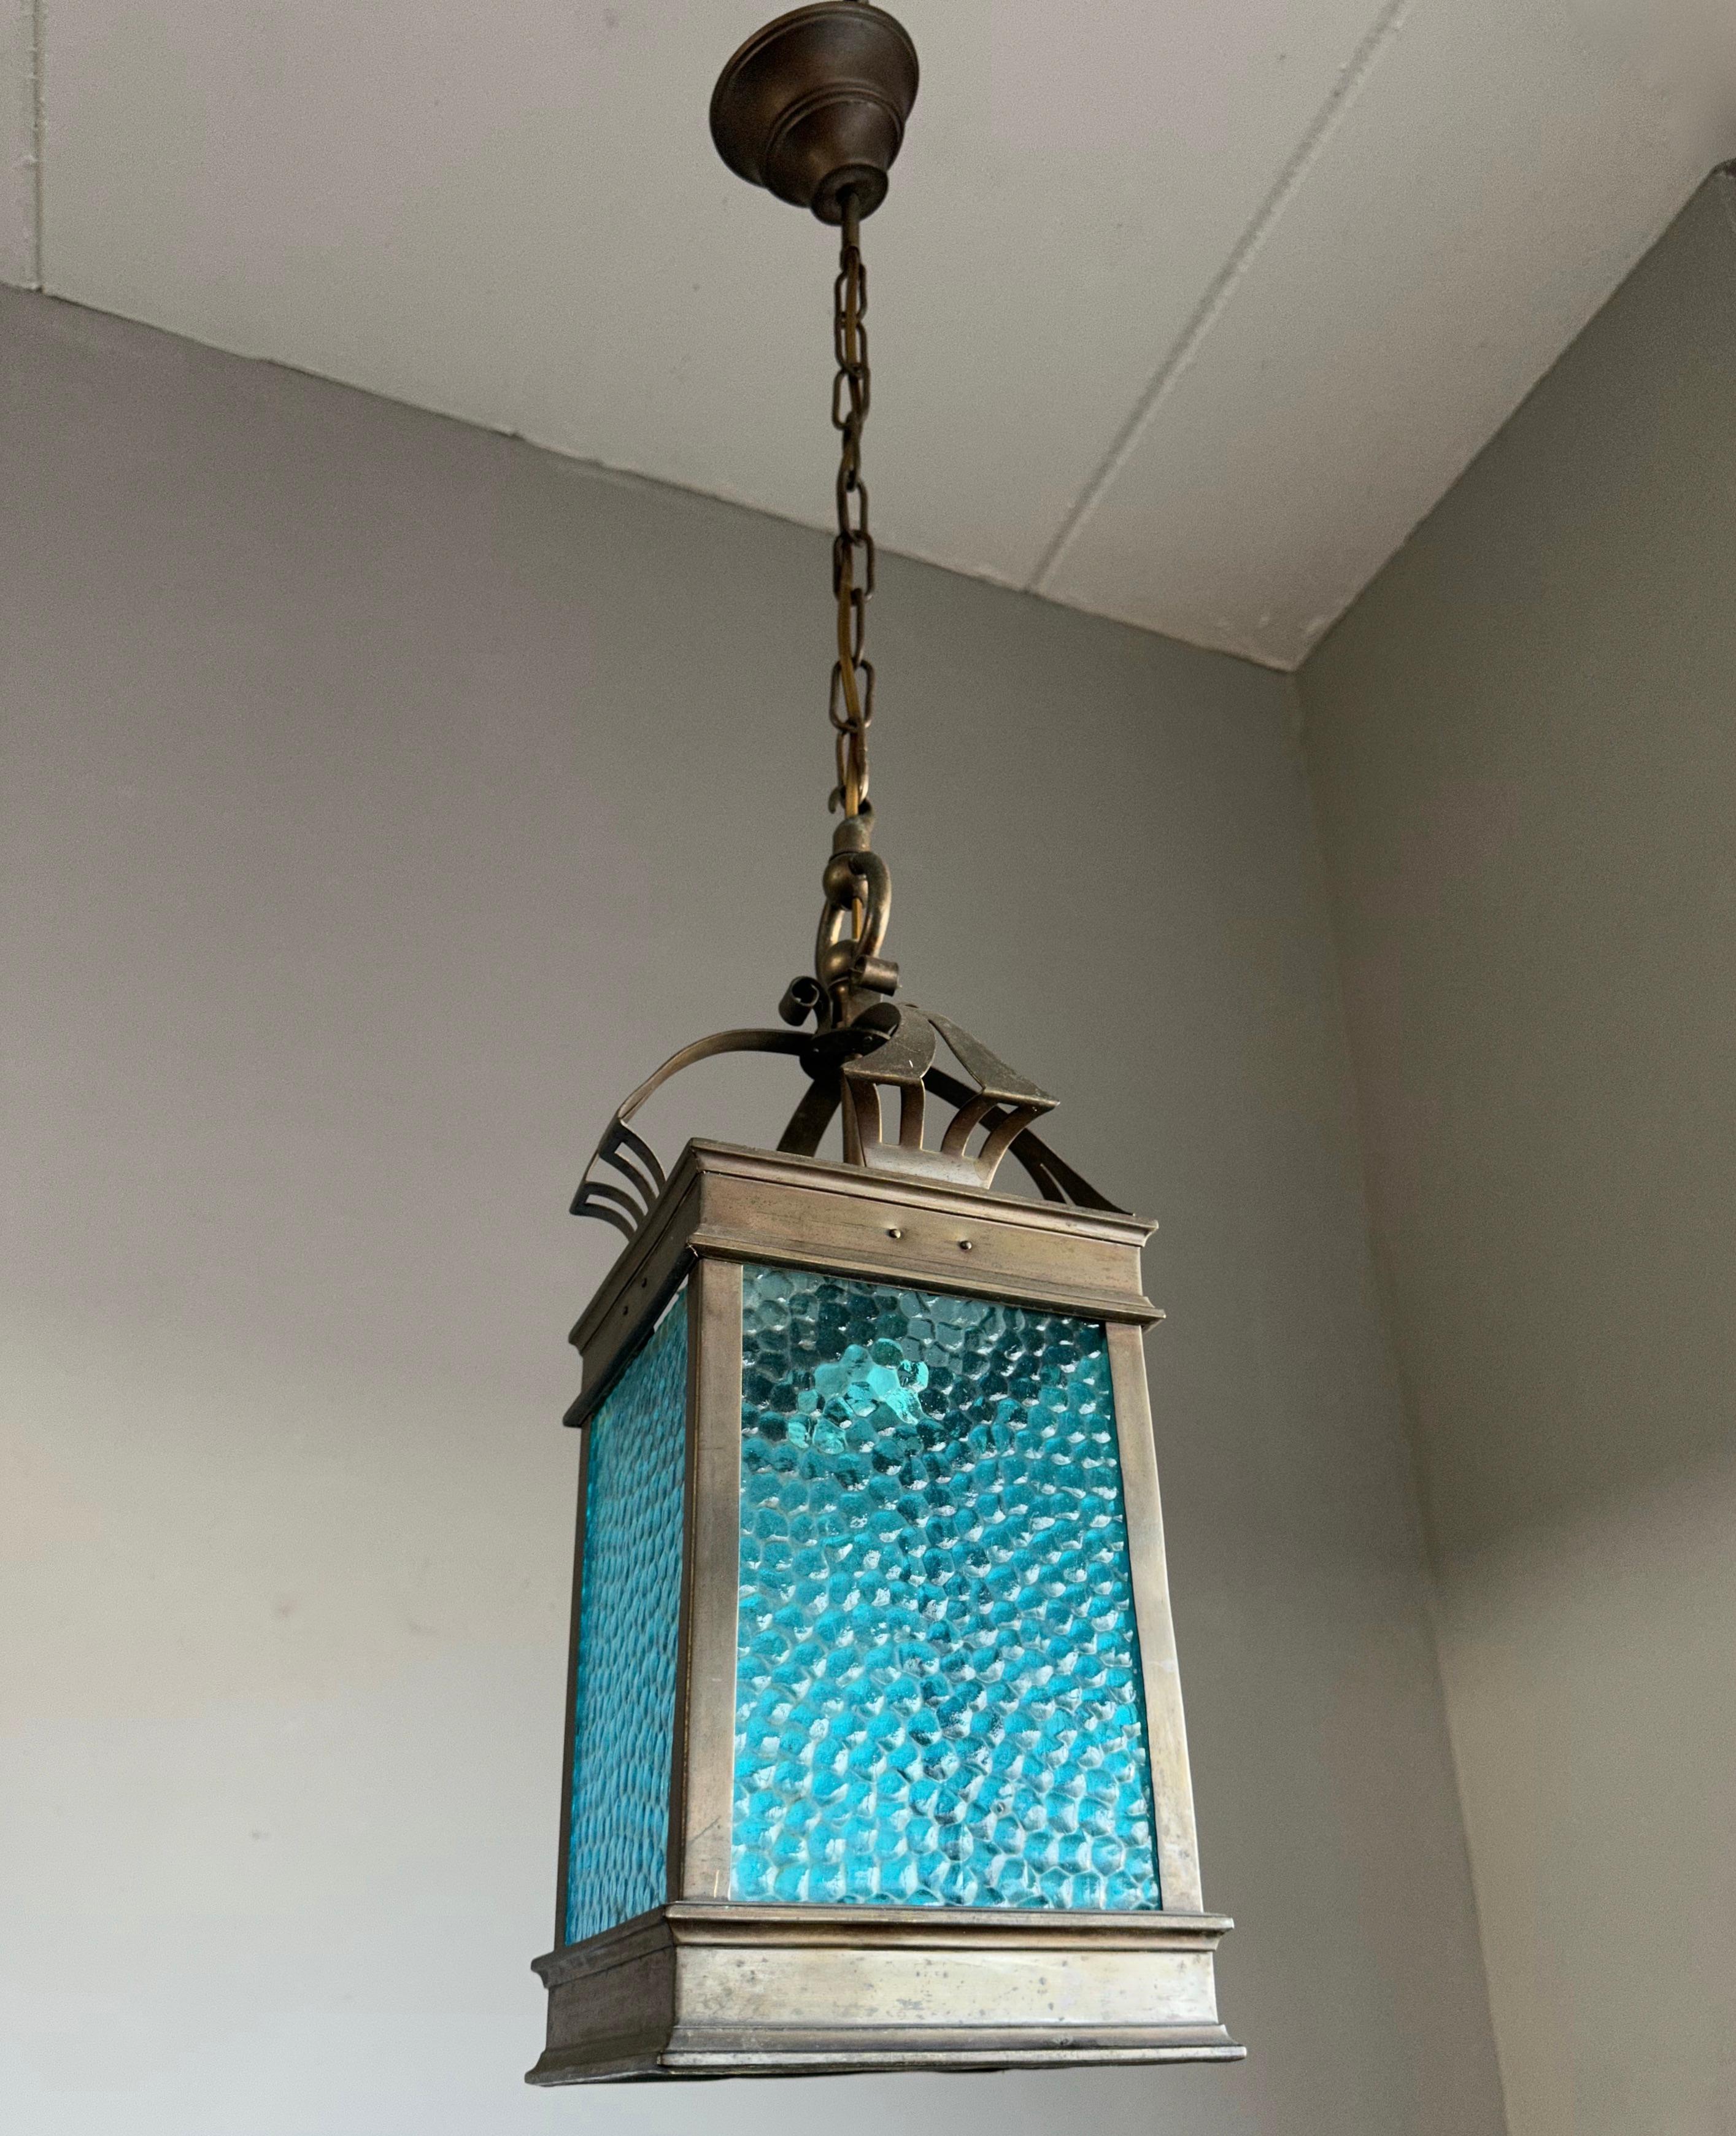 Rare and all handcrafted light fixture of beautiful design and perfect proportions.

If you are looking for an early 1900s, stylish and top quality crafted light to grace your entry hall, landing or bedroom then look no further, because we have